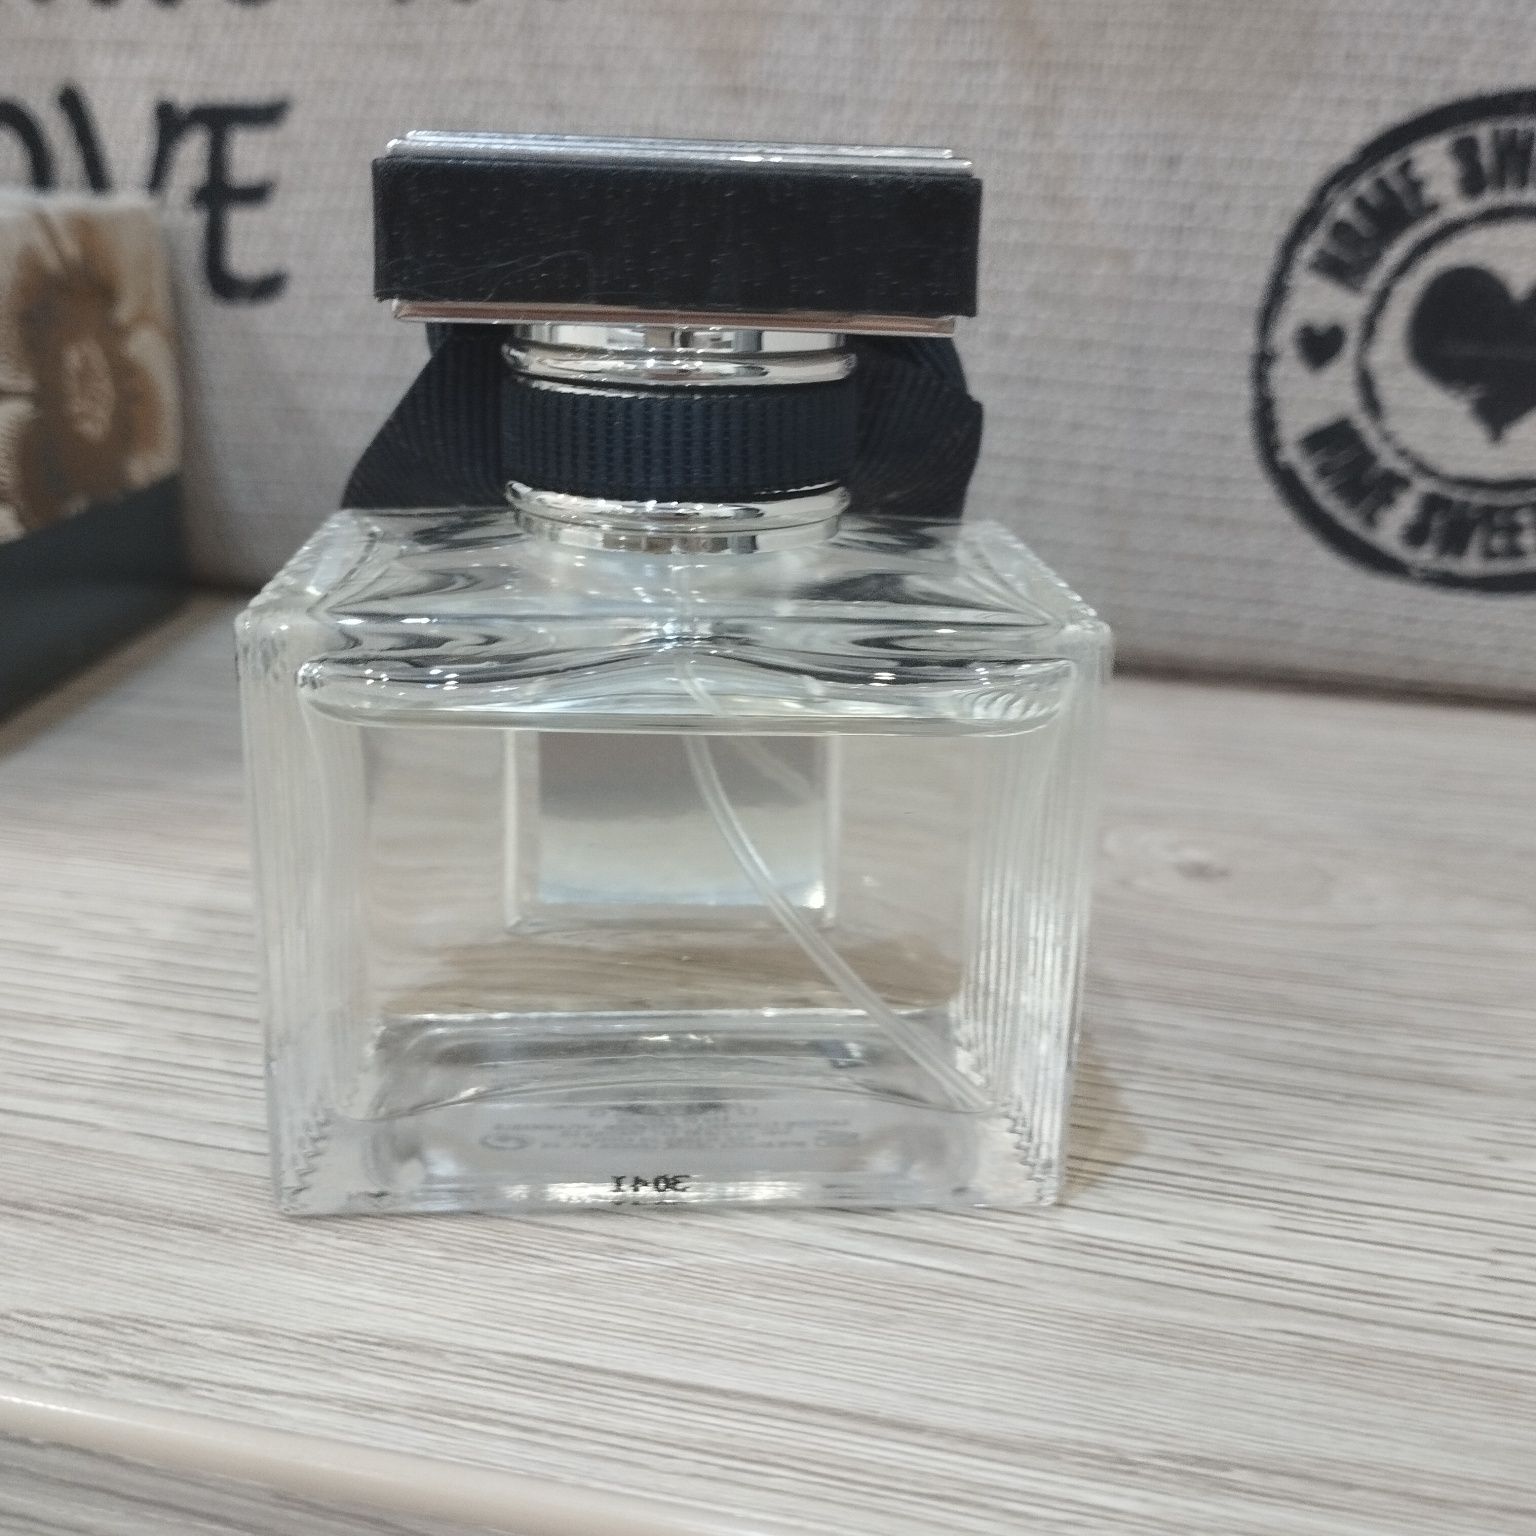 Perfumy Abercrombie&Fitch no.1